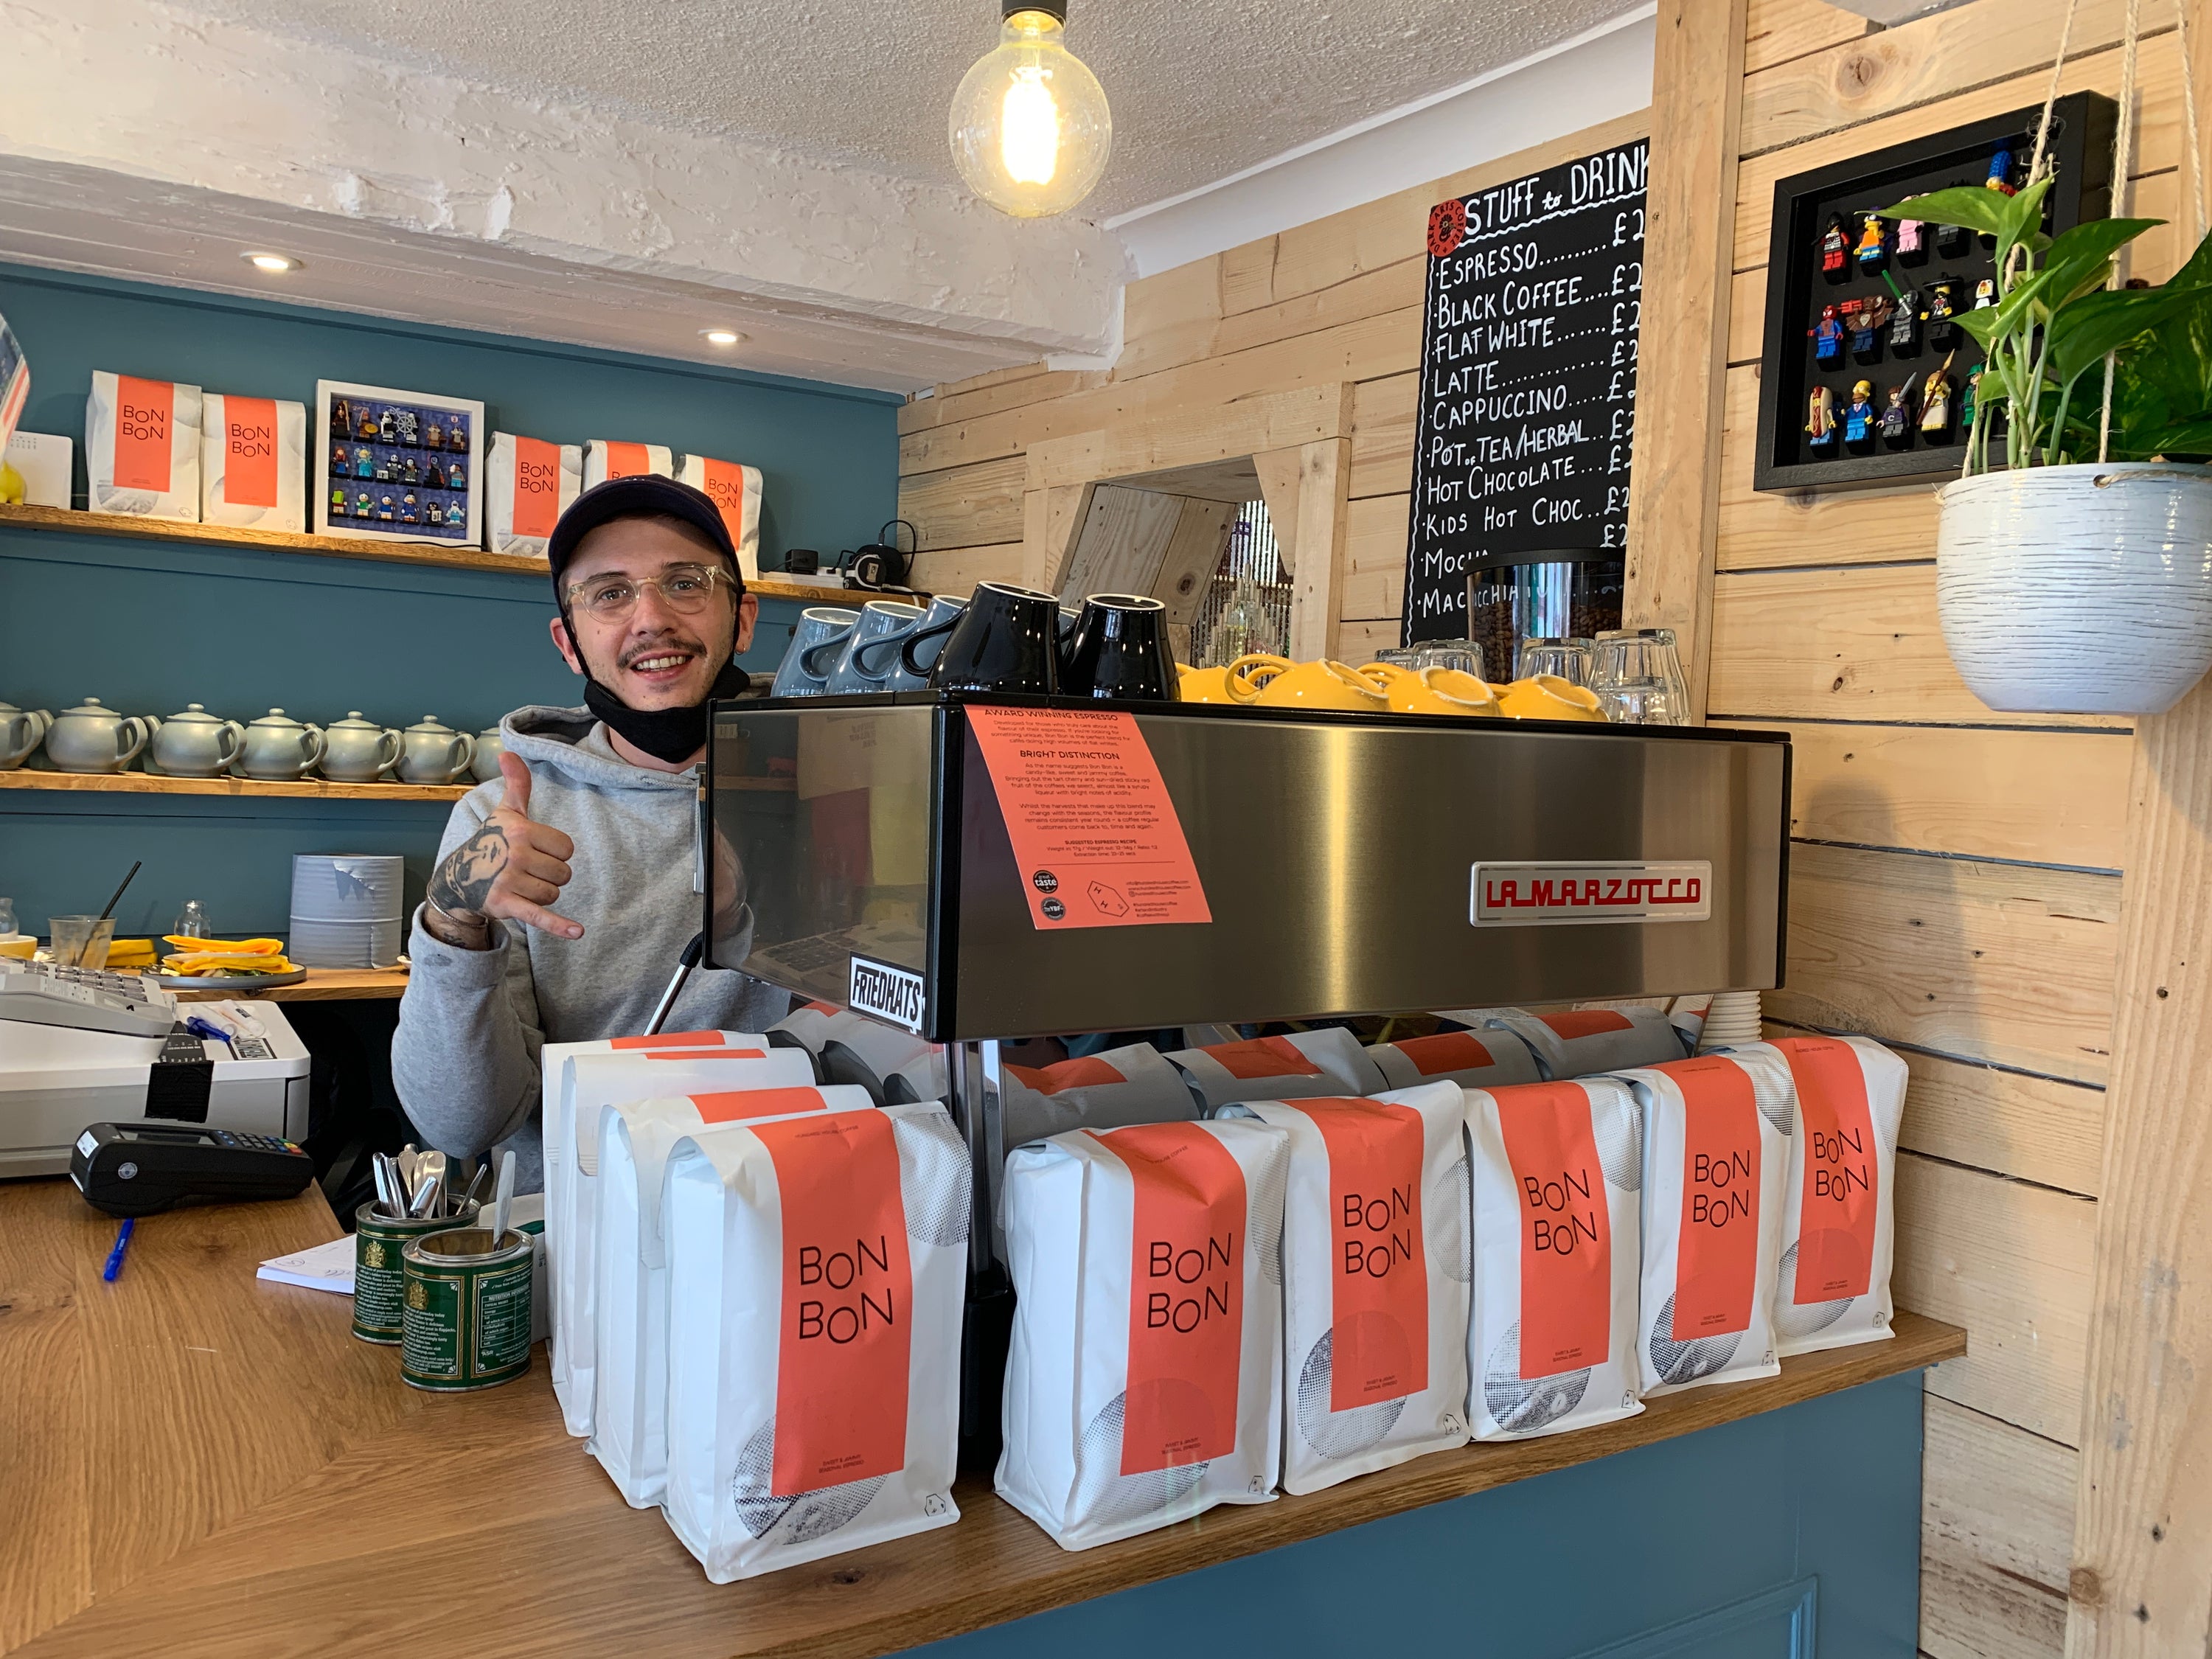 Little Yellow Pig - Chester  "We’ve been working with Hundred House Coffee for the past couple of years, and we couldn’t be happier. We’ve been through thousands of kilos of coffee and the consistency is unmatched. Our customers love it.